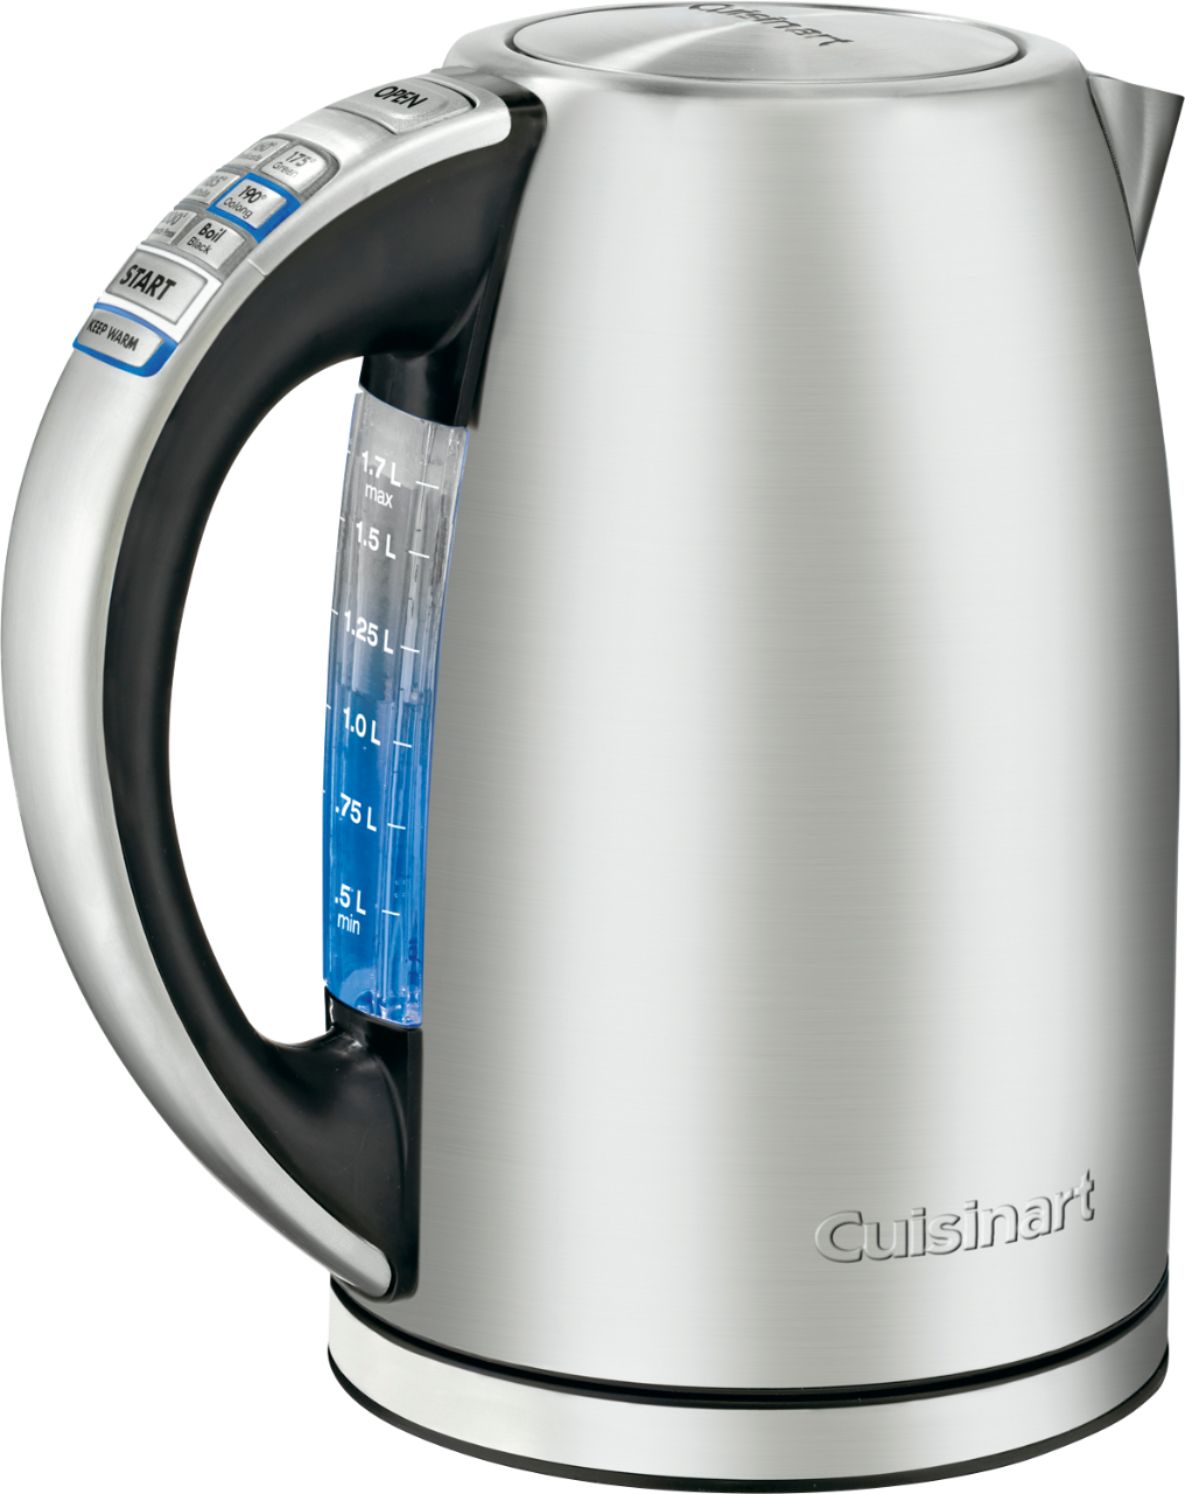 Cuisinart ZPV-2607 1.7-Liter Stainless Steel Cordless Electric Kettle Silver for sale online